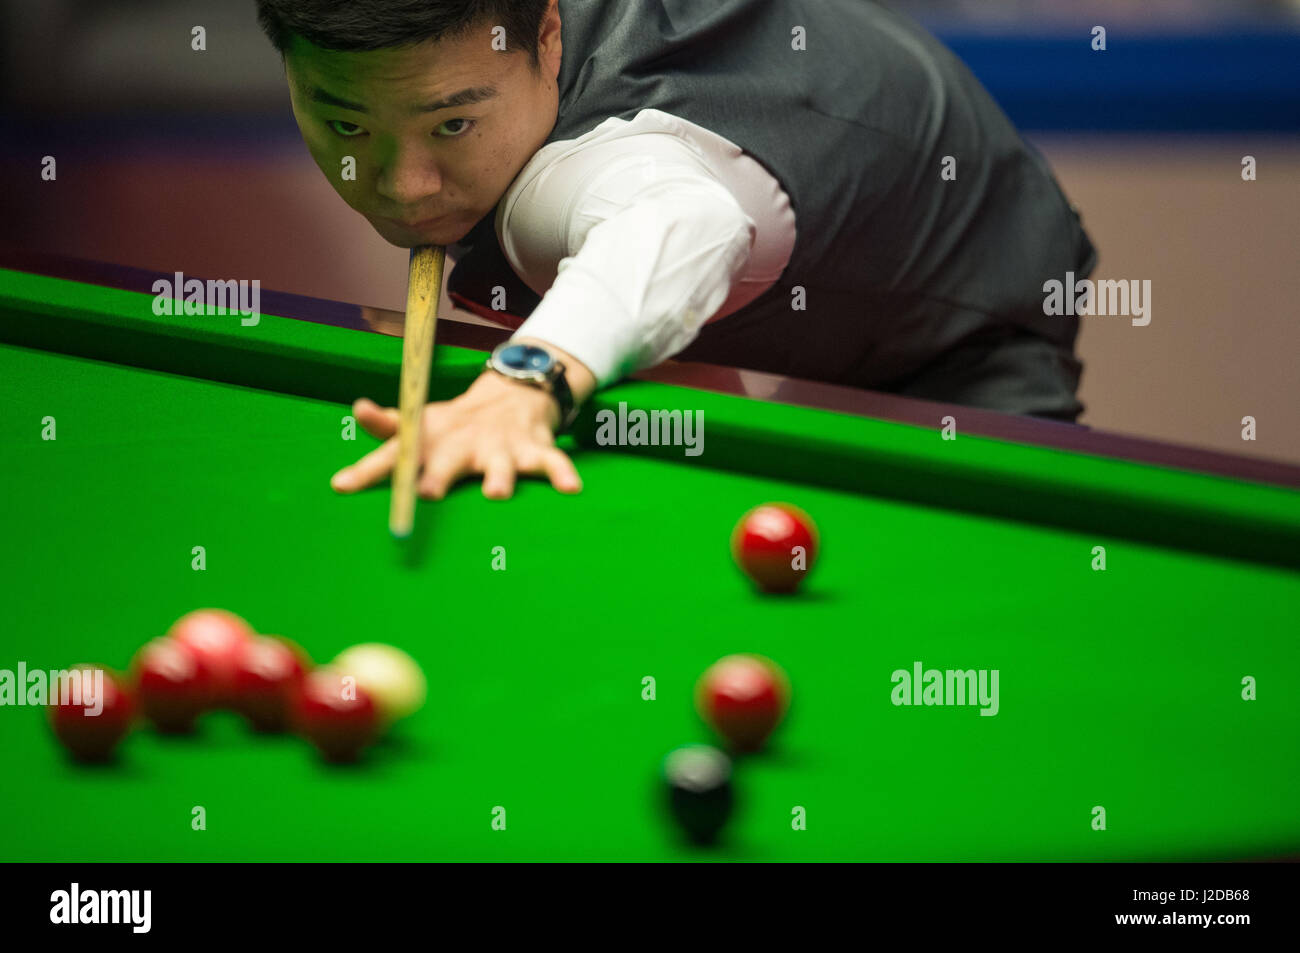 Sheffield, UK. 27th Apr, 2017. Ding Junhui of China competes during the first session of the semifinal match against Mark Selby of England during the World Snooker Championship 2017 at the Crucible Theatre in Sheffield, UK, on April 27, 2017. Credit: Jon Buckle/Xinhua/Alamy Live News Stock Photo